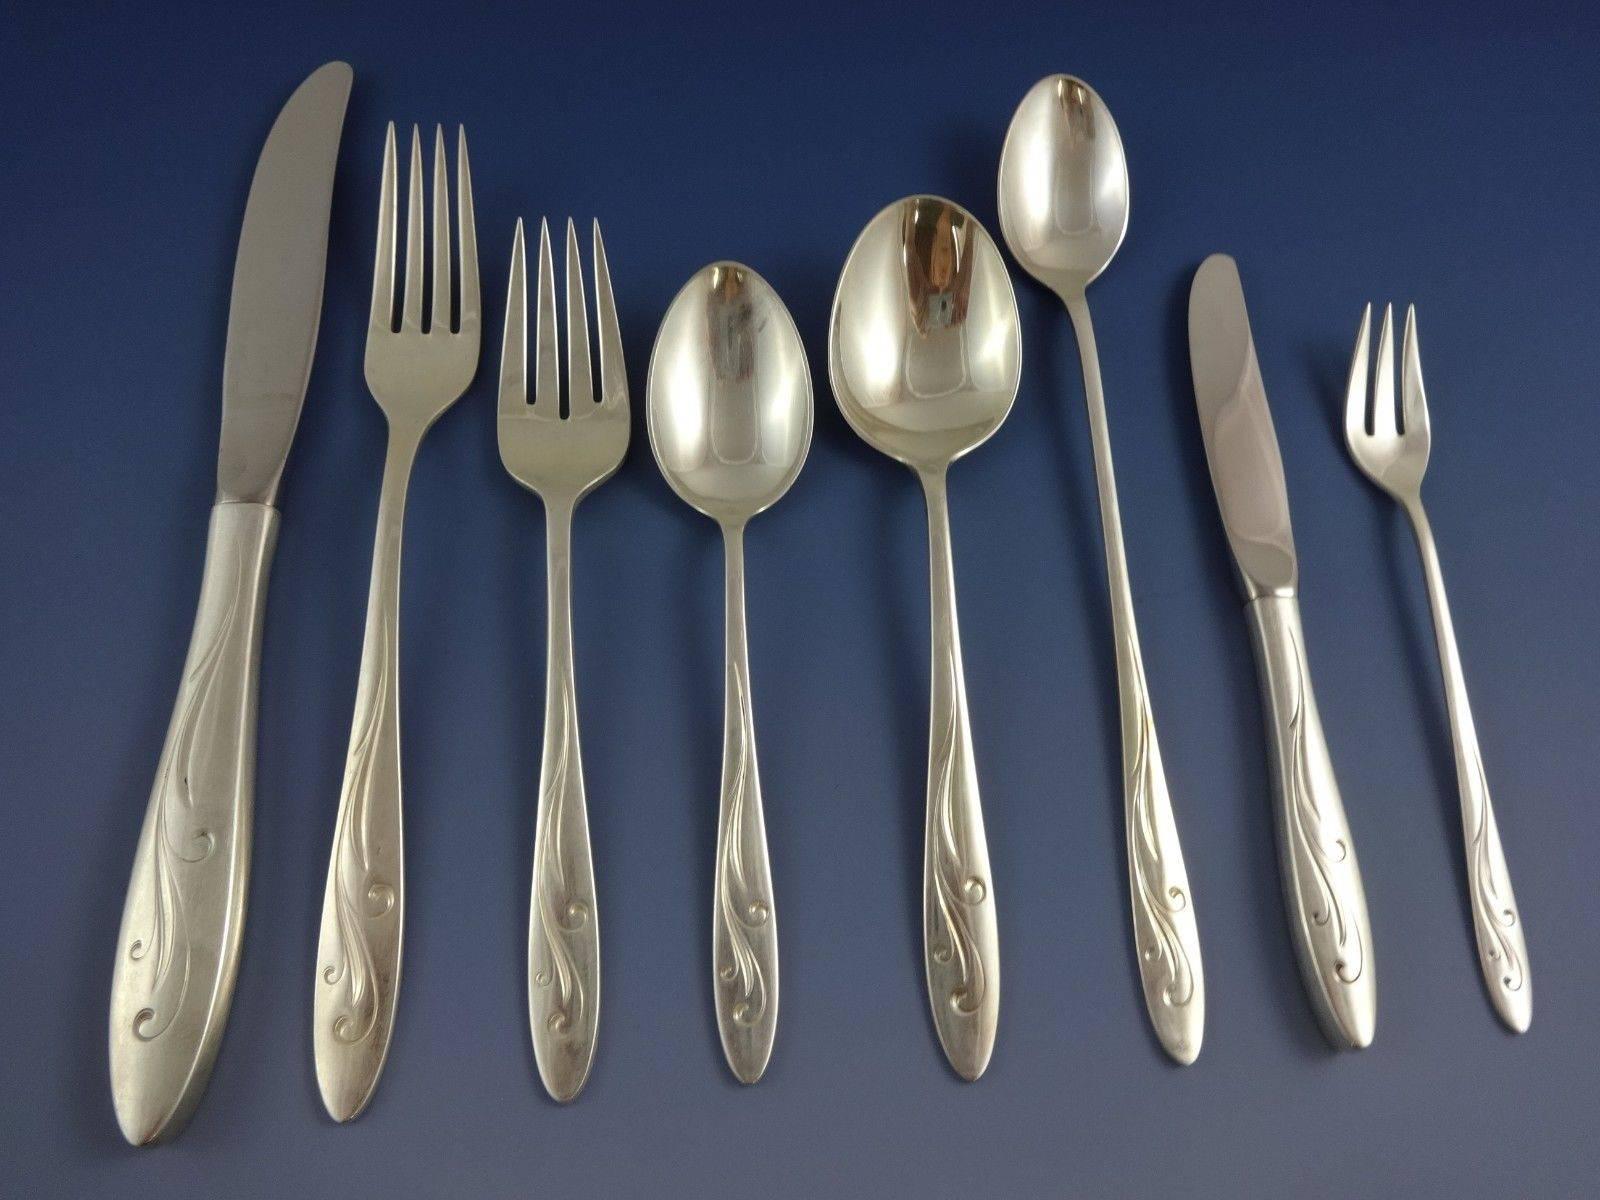 Beautiful awakening by Towle sterling silver Flatware set, 74 pieces. This set includes:

Eight Knives, 8 7/8